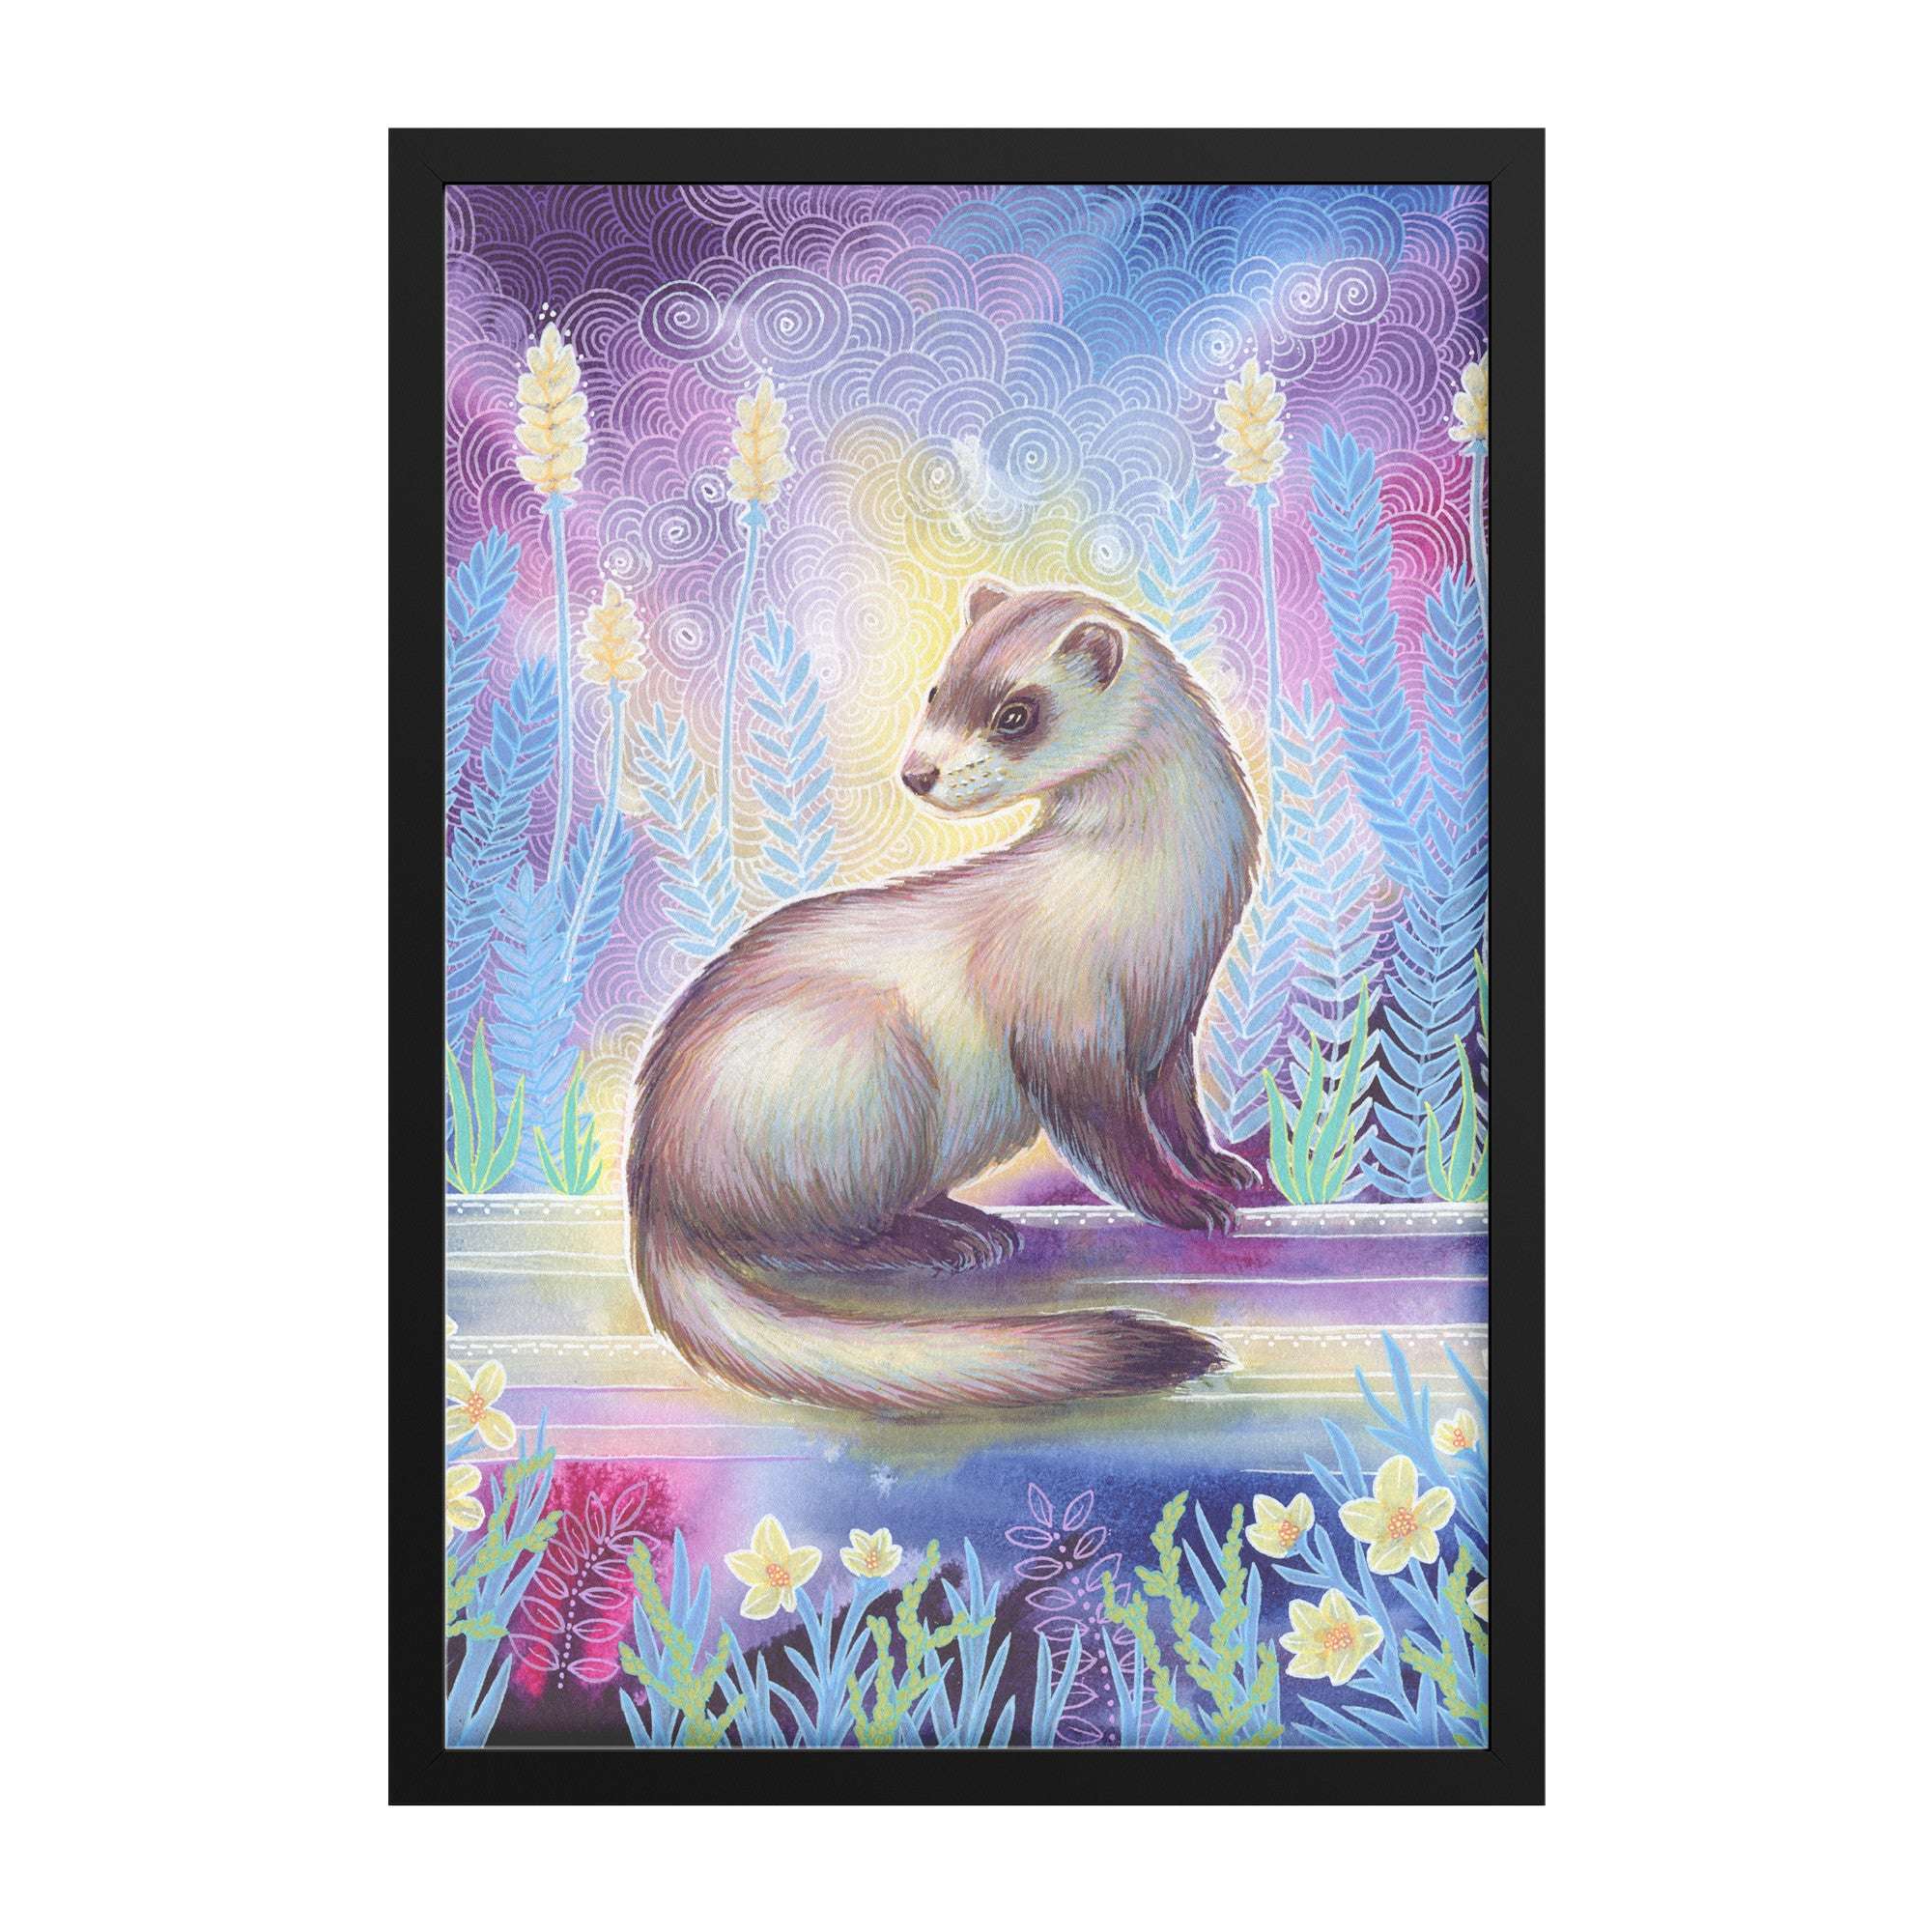 Colorful framed ferret print of a ferret sitting in a whimsical garden with swirling purple and blue patterns in the background and bright flowers around.